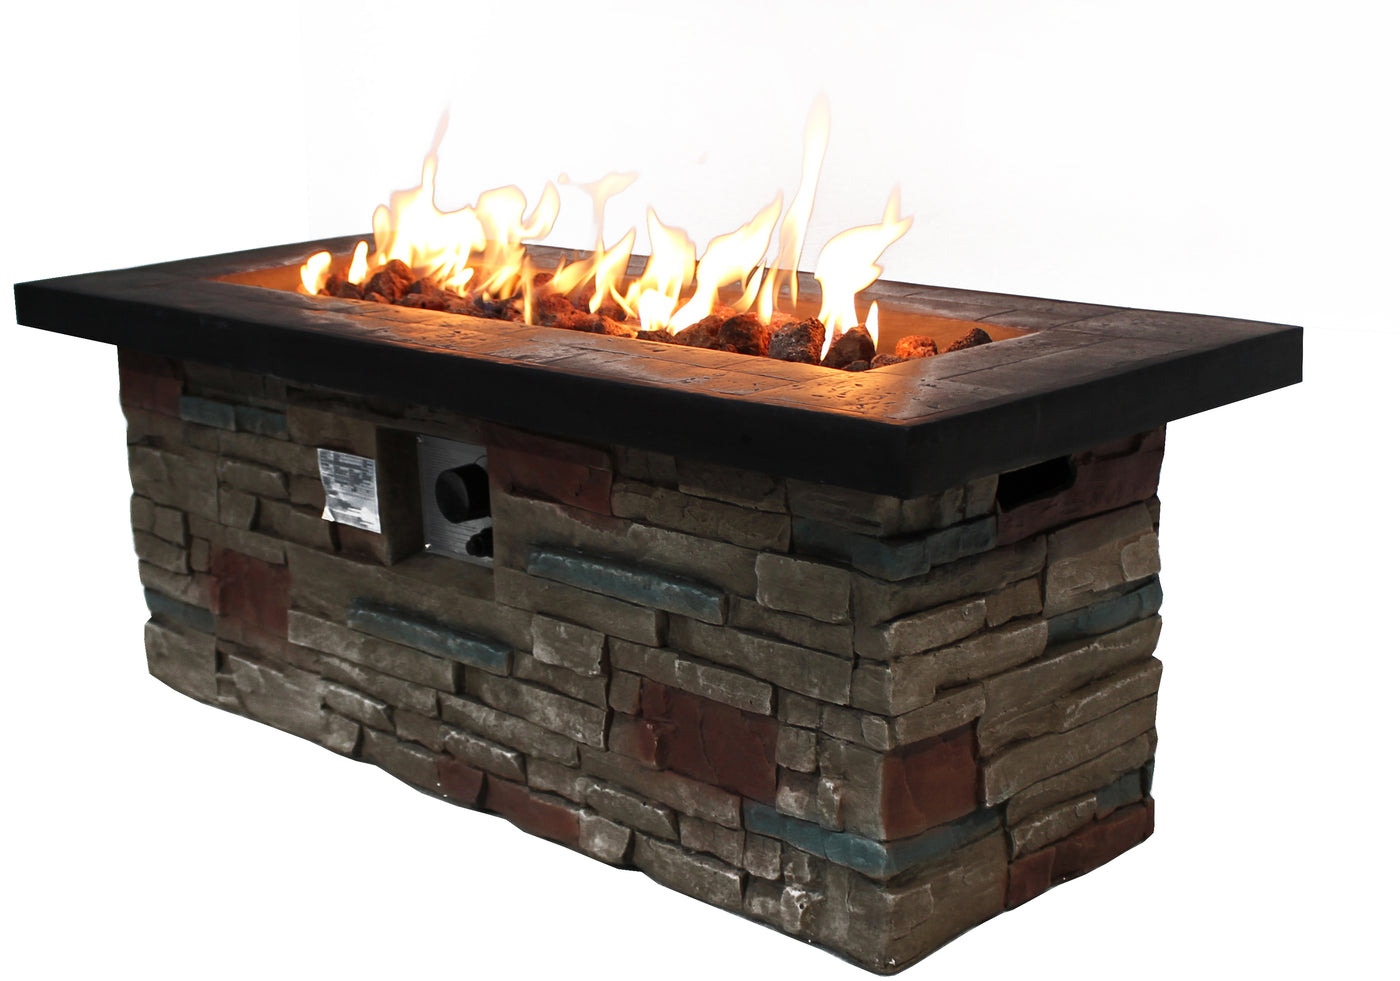 BRICK EFFECT RECTANGULAR GAS FIRE PIT W/GAS BOTTLE COVER - OUTDOOR FURNITURE